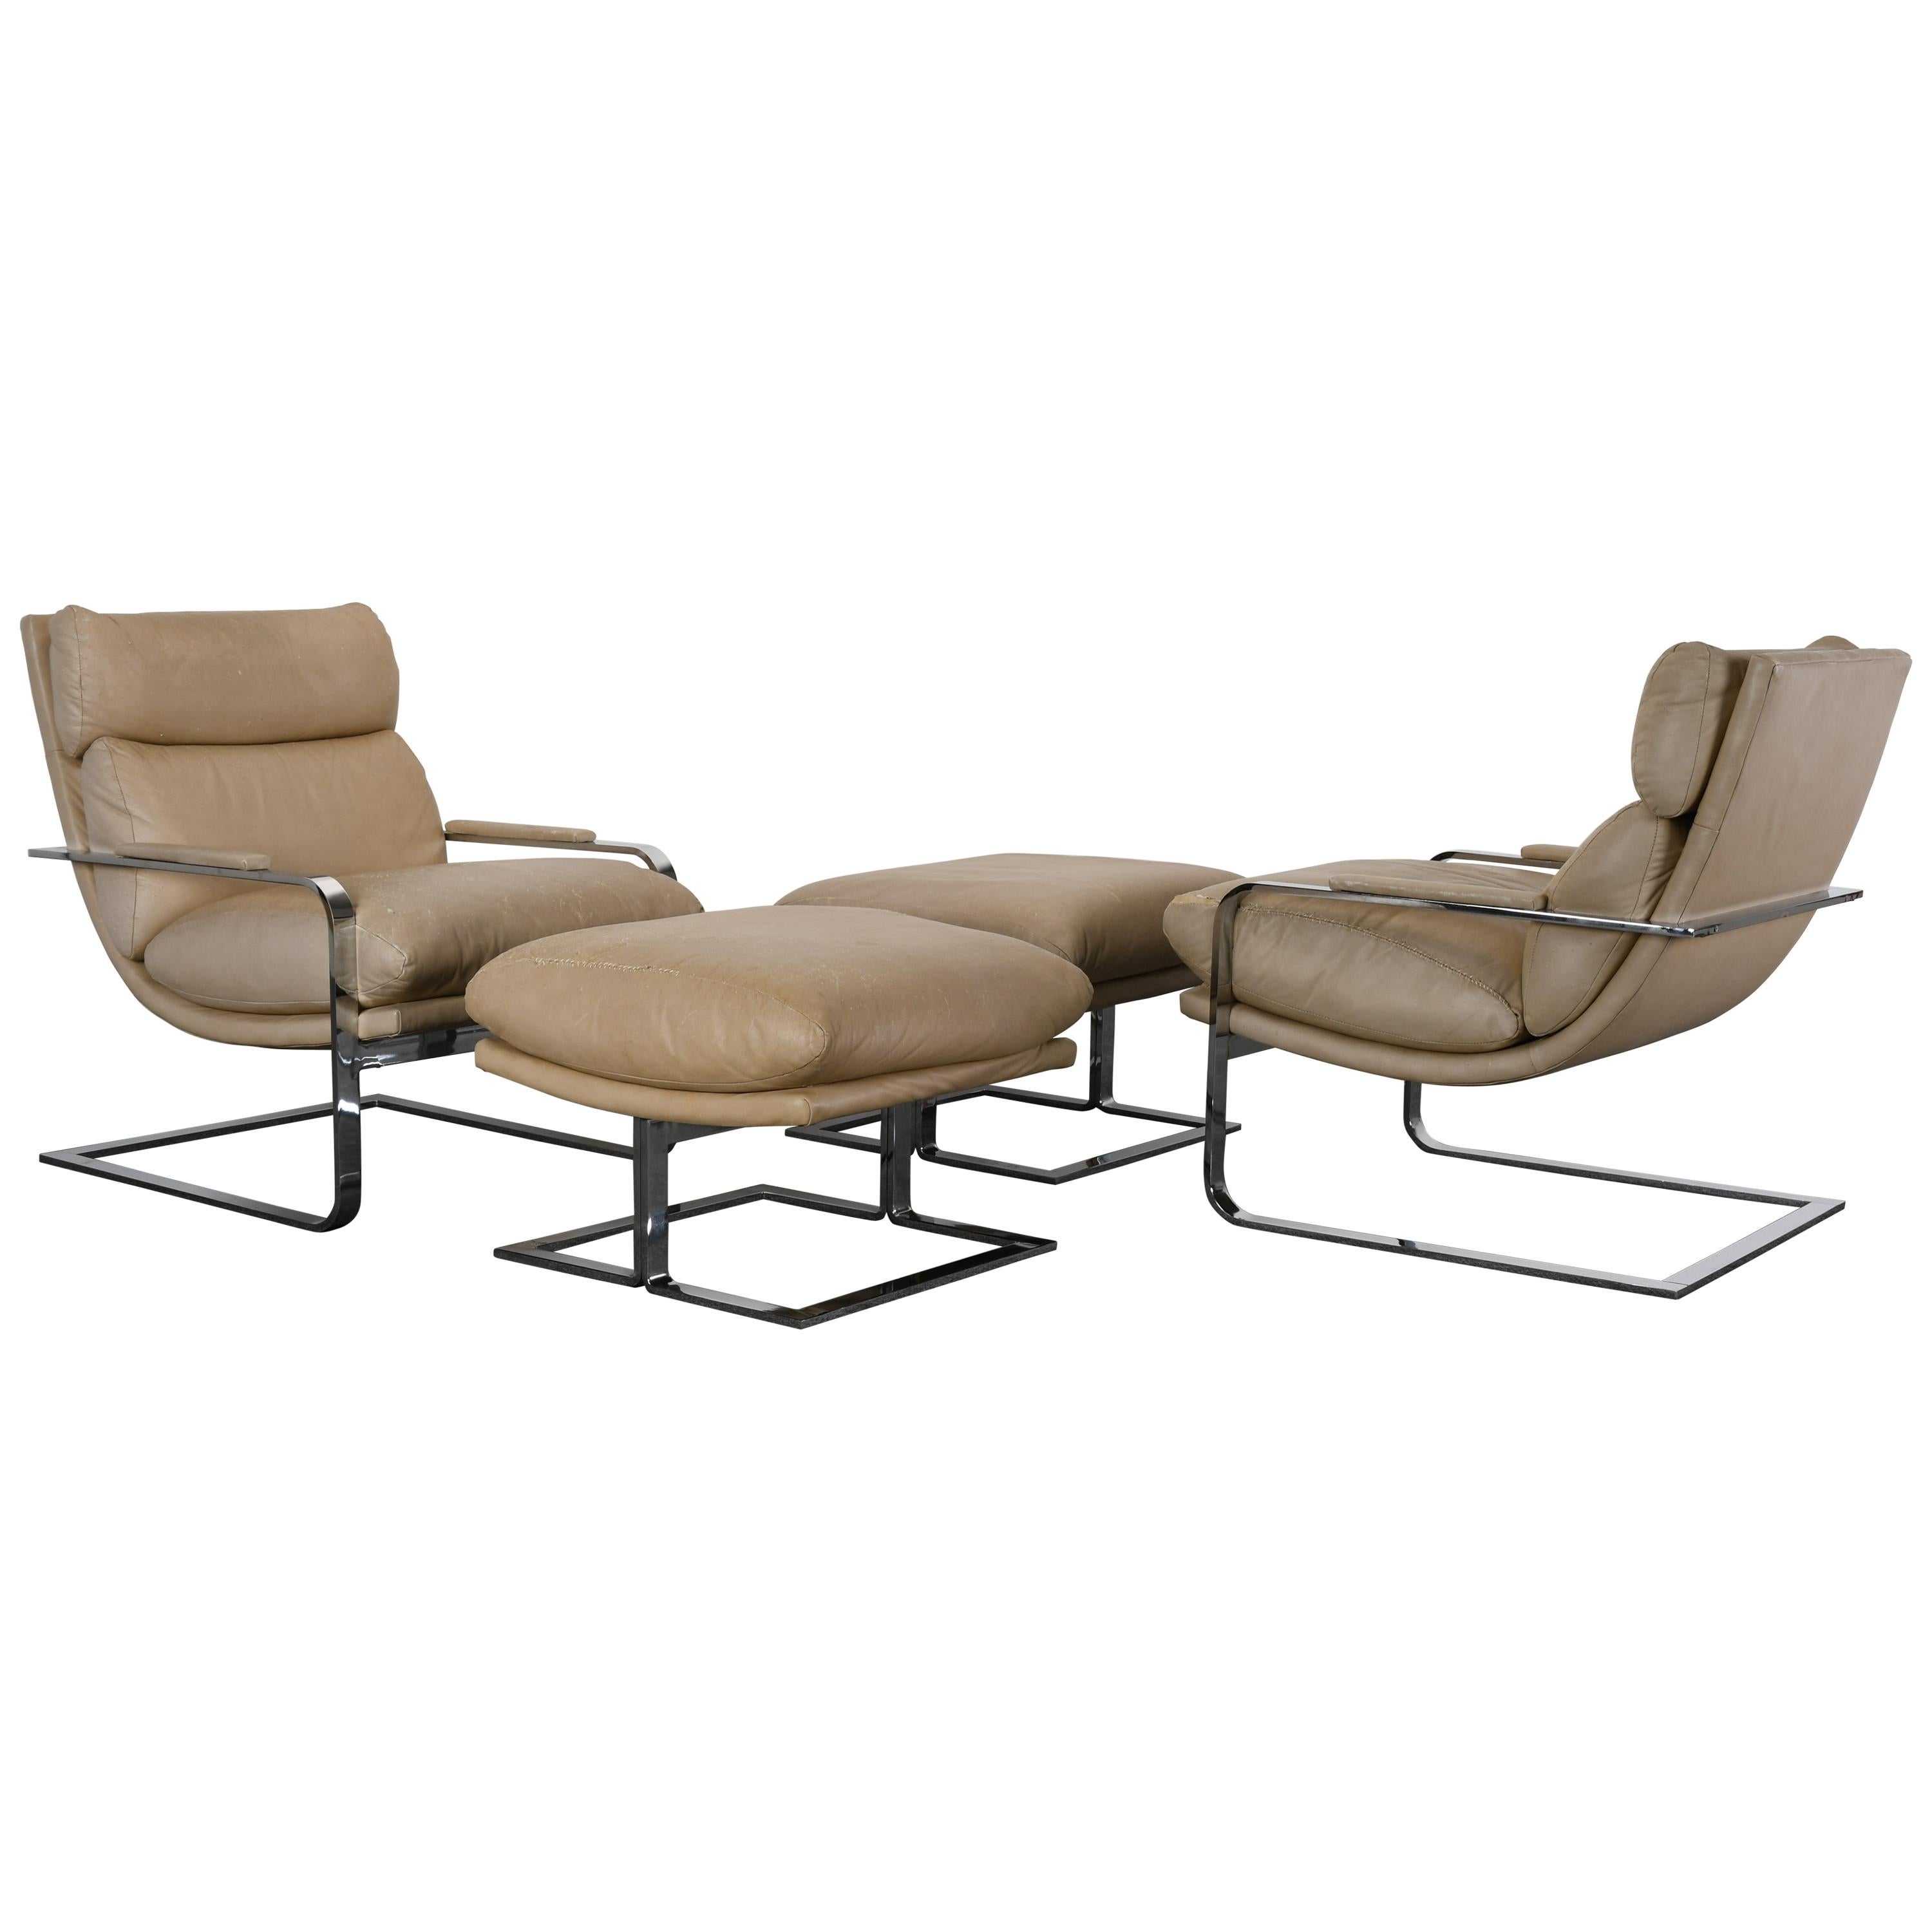 Pair of Chrome Chairs and Ottomans by Directional, 1970s